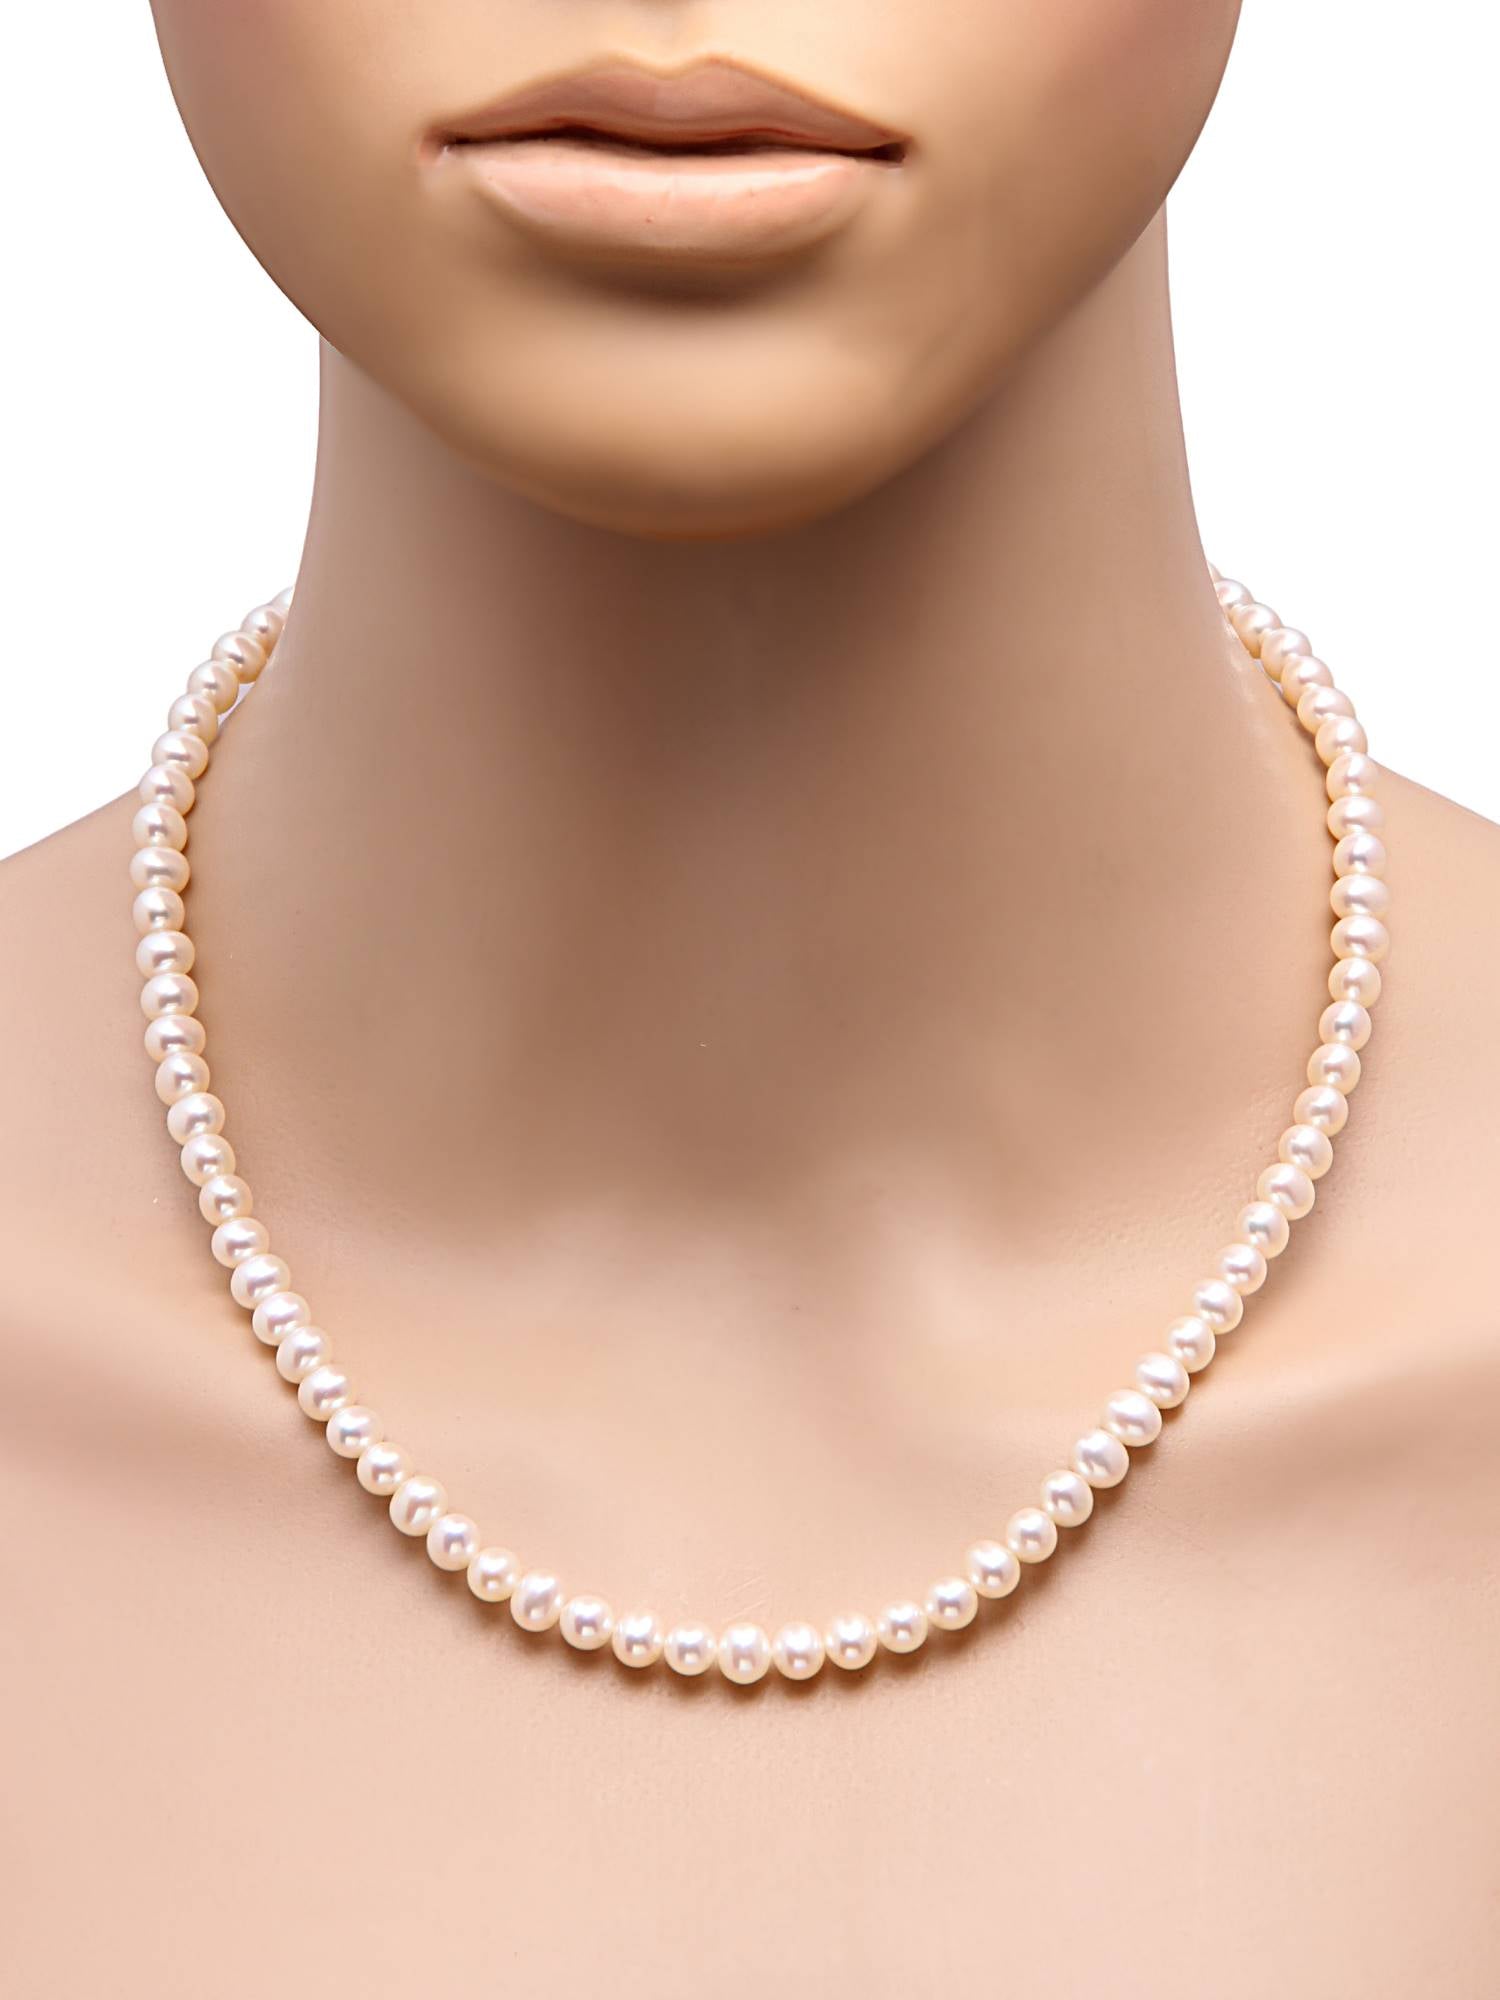 Semi Round (6mm) White Freshwater Real Pearl Necklace with 92.5 Sterling Silver Clasp 115 carats - (F1005)